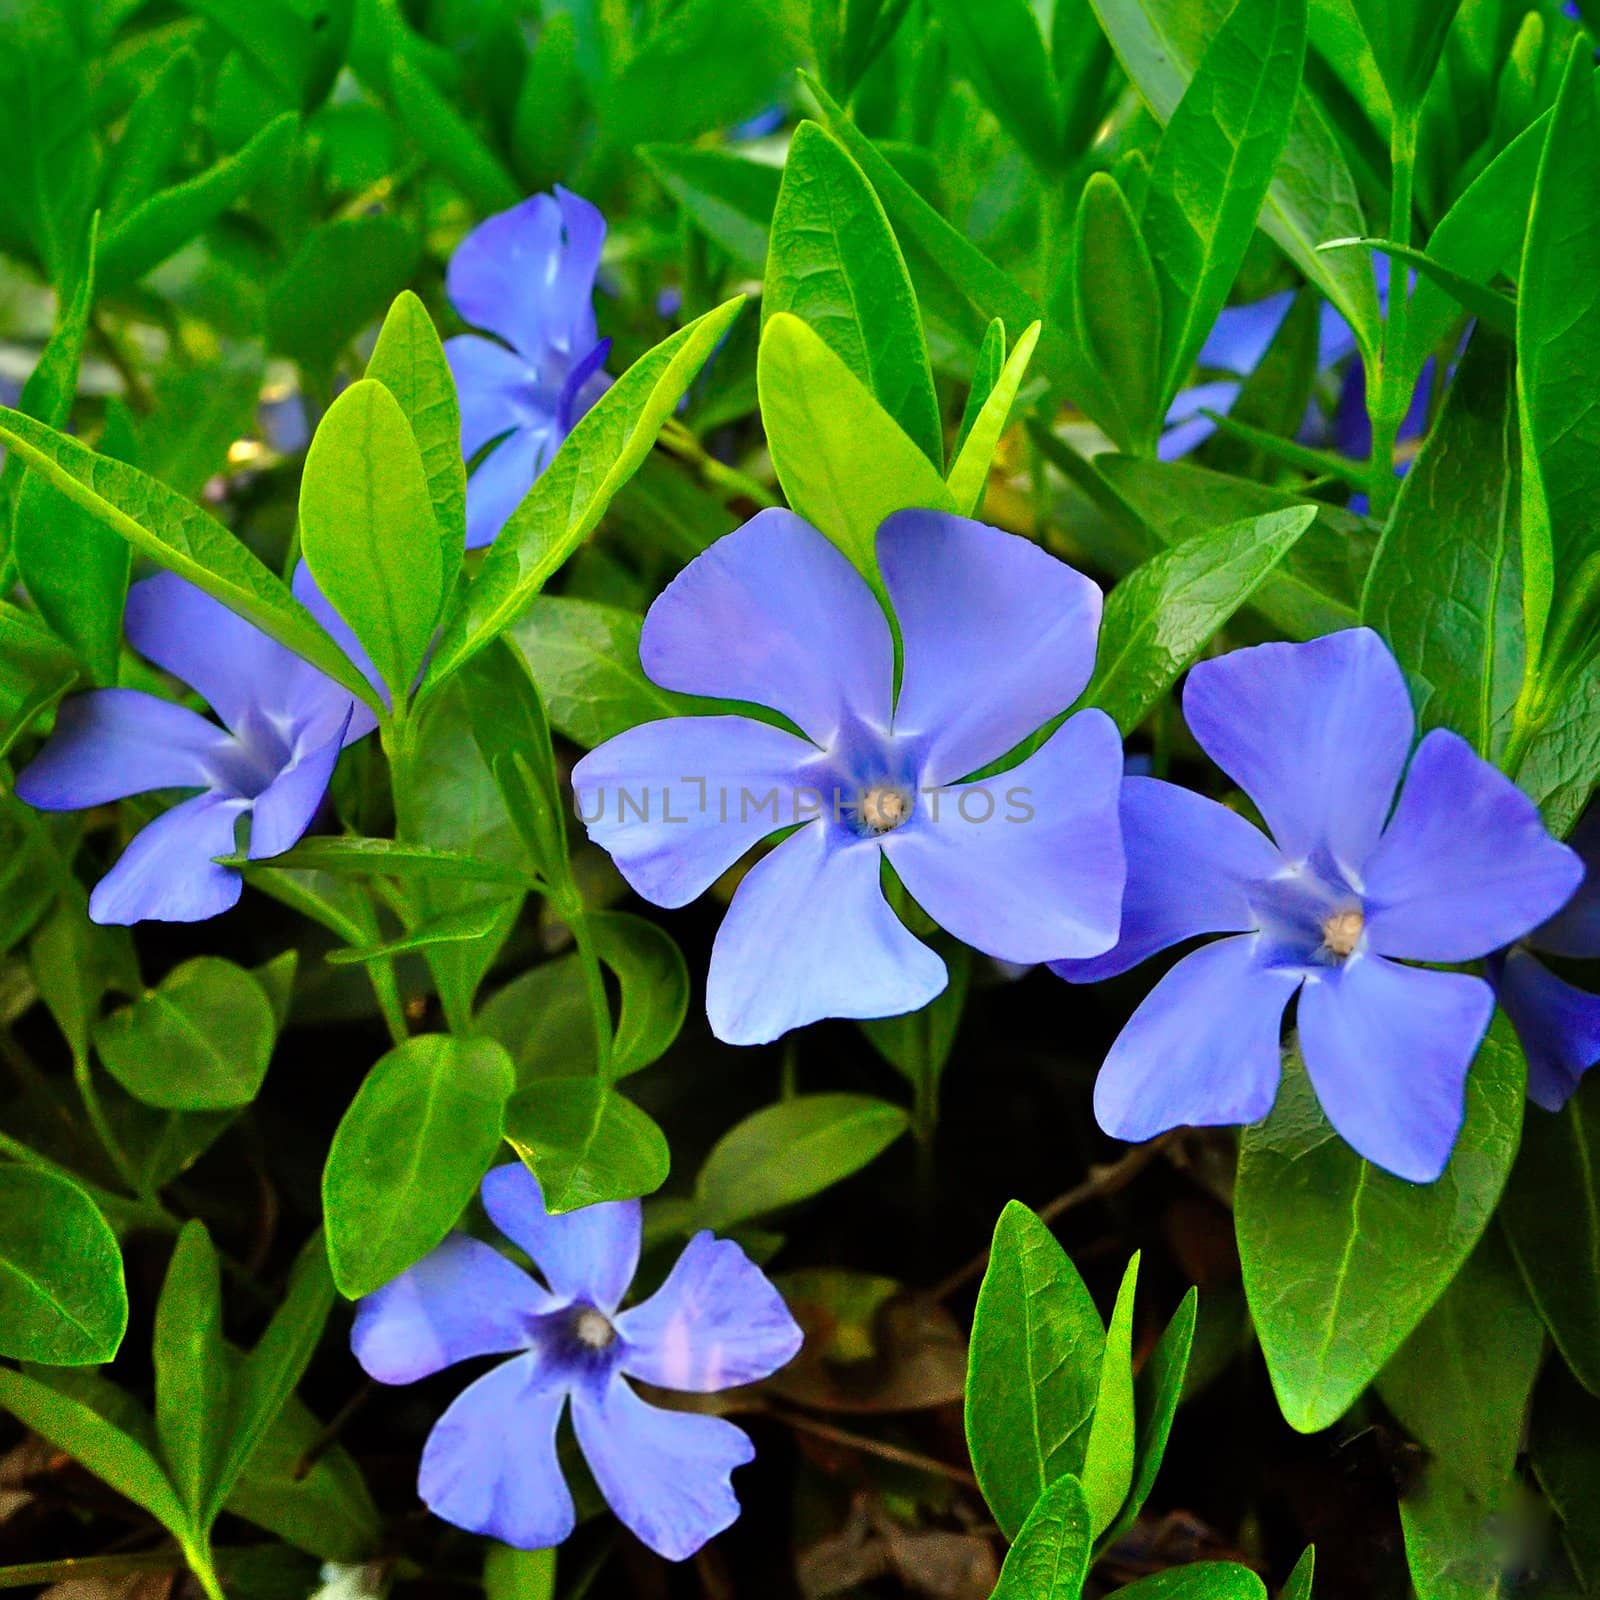 Several periwinkle by azjoma